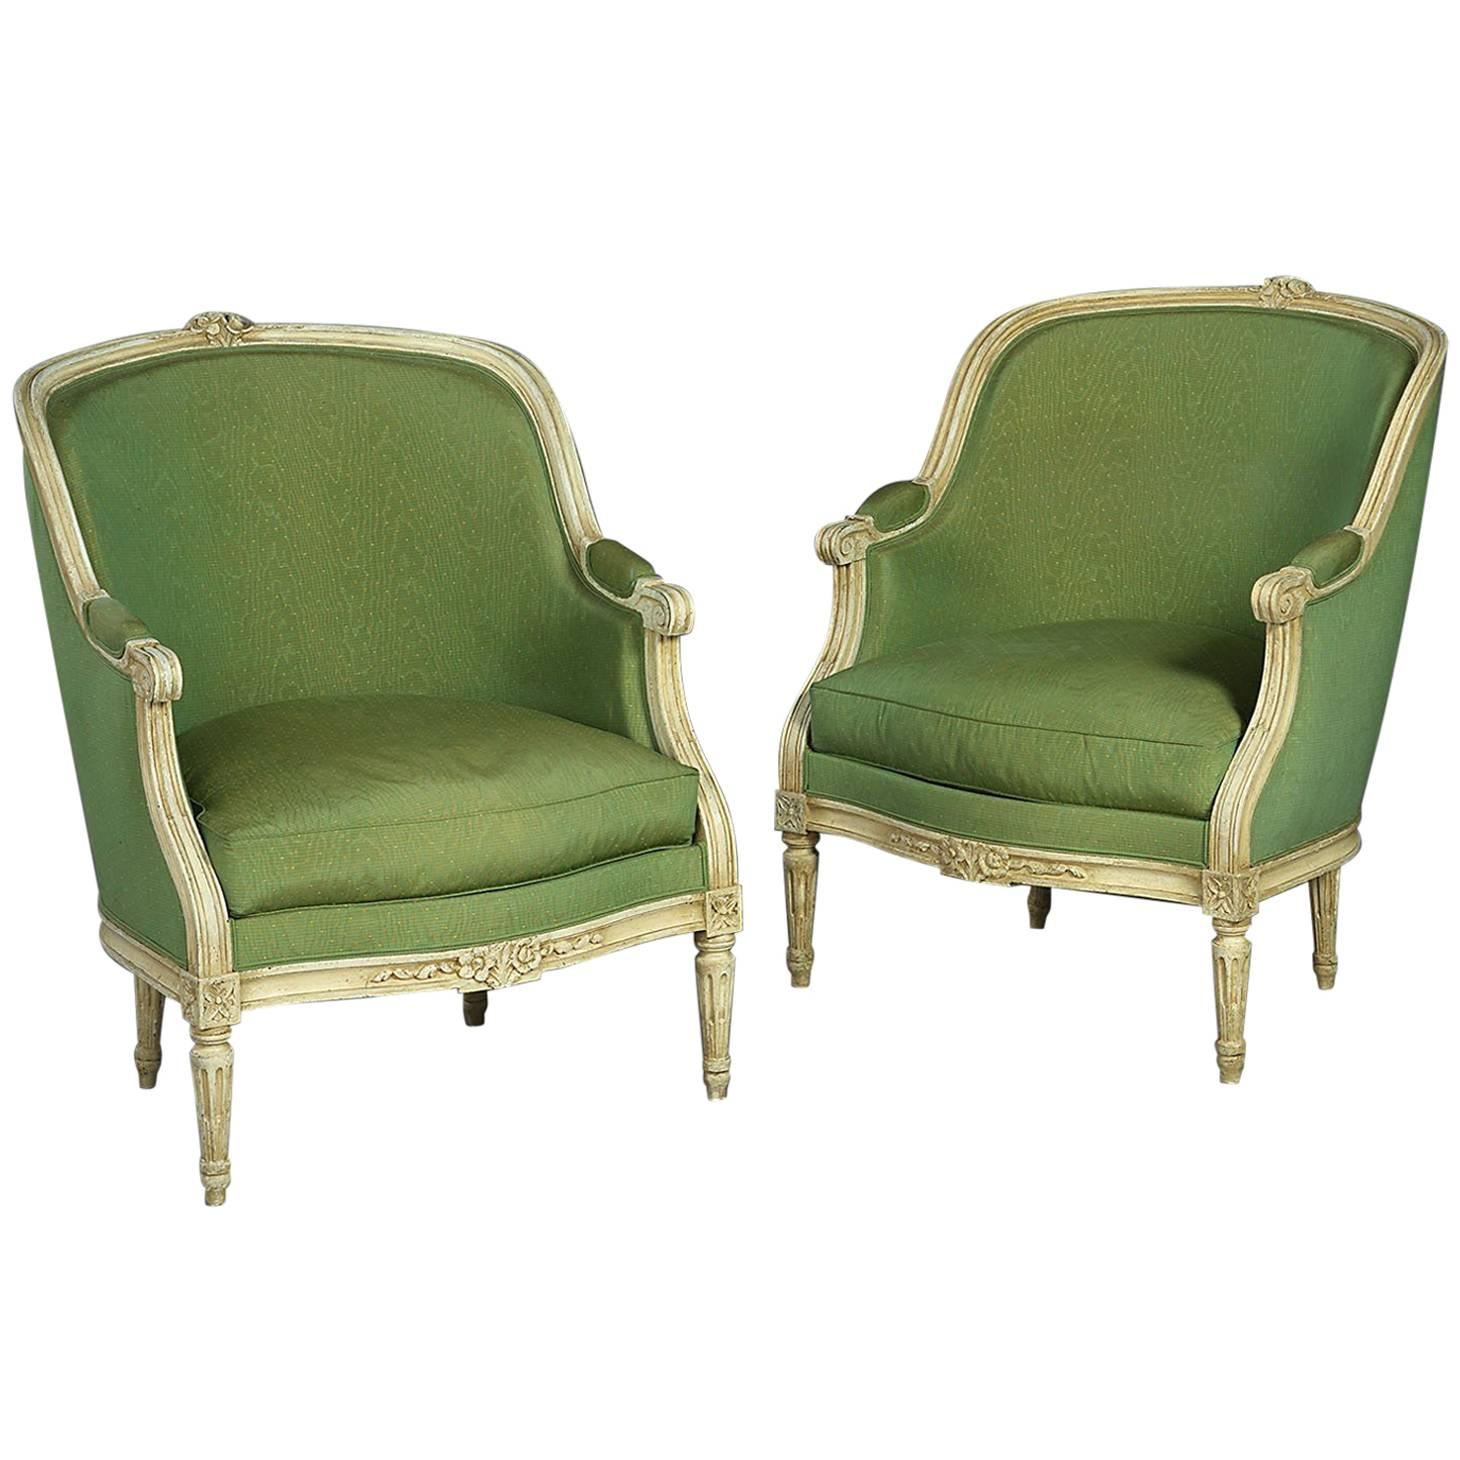 Pair of Late 19th Century Overscale Bergère